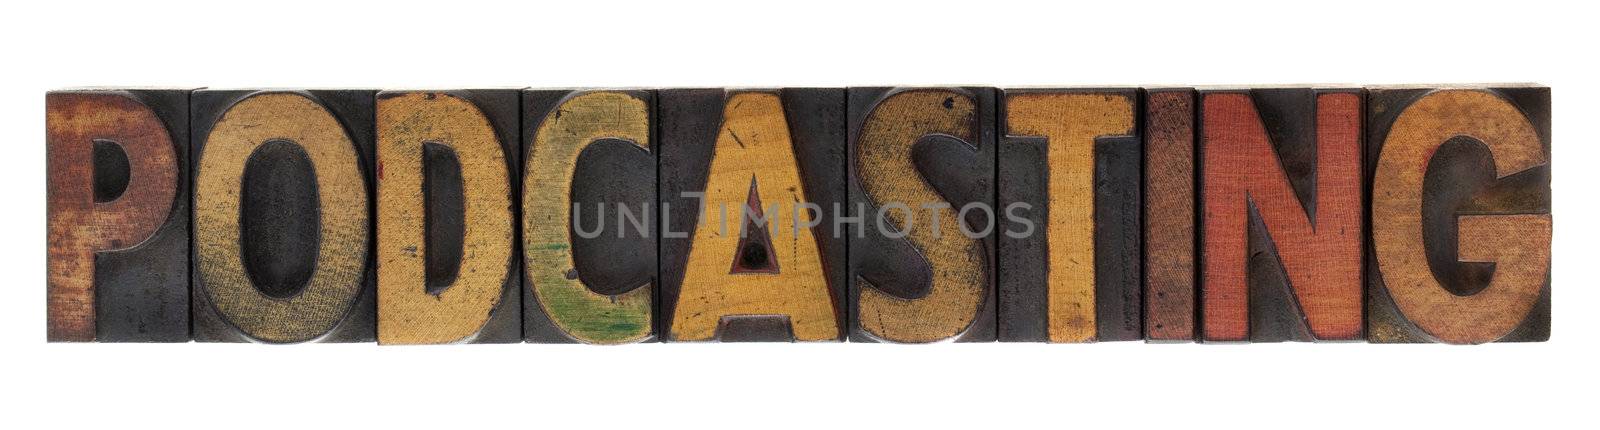 word of podcasting in vintage wood block letterpress type, stained by ink, isolated on white